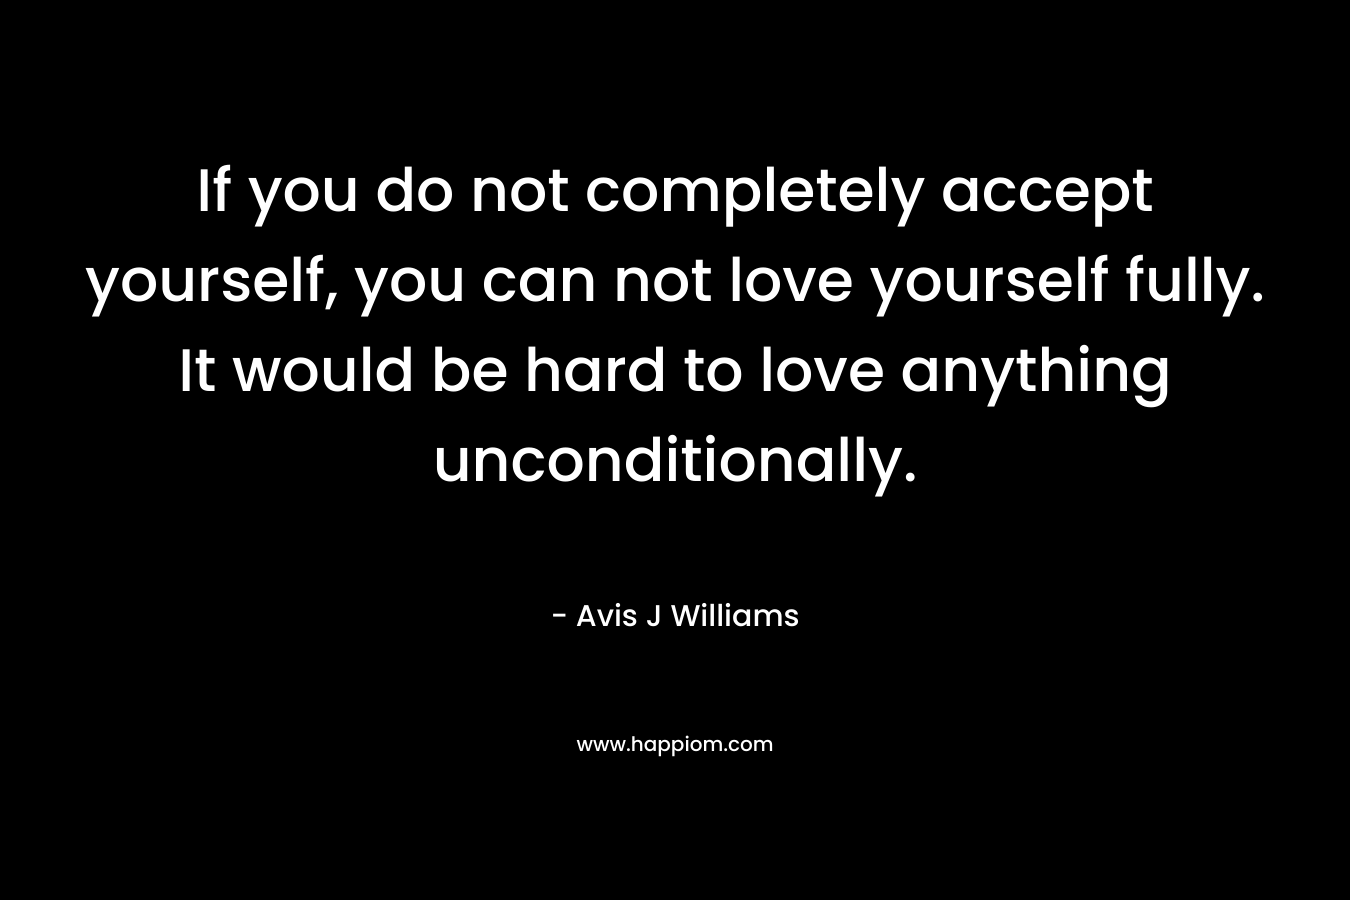 If you do not completely accept yourself, you can not love yourself fully. It would be hard to love anything unconditionally.